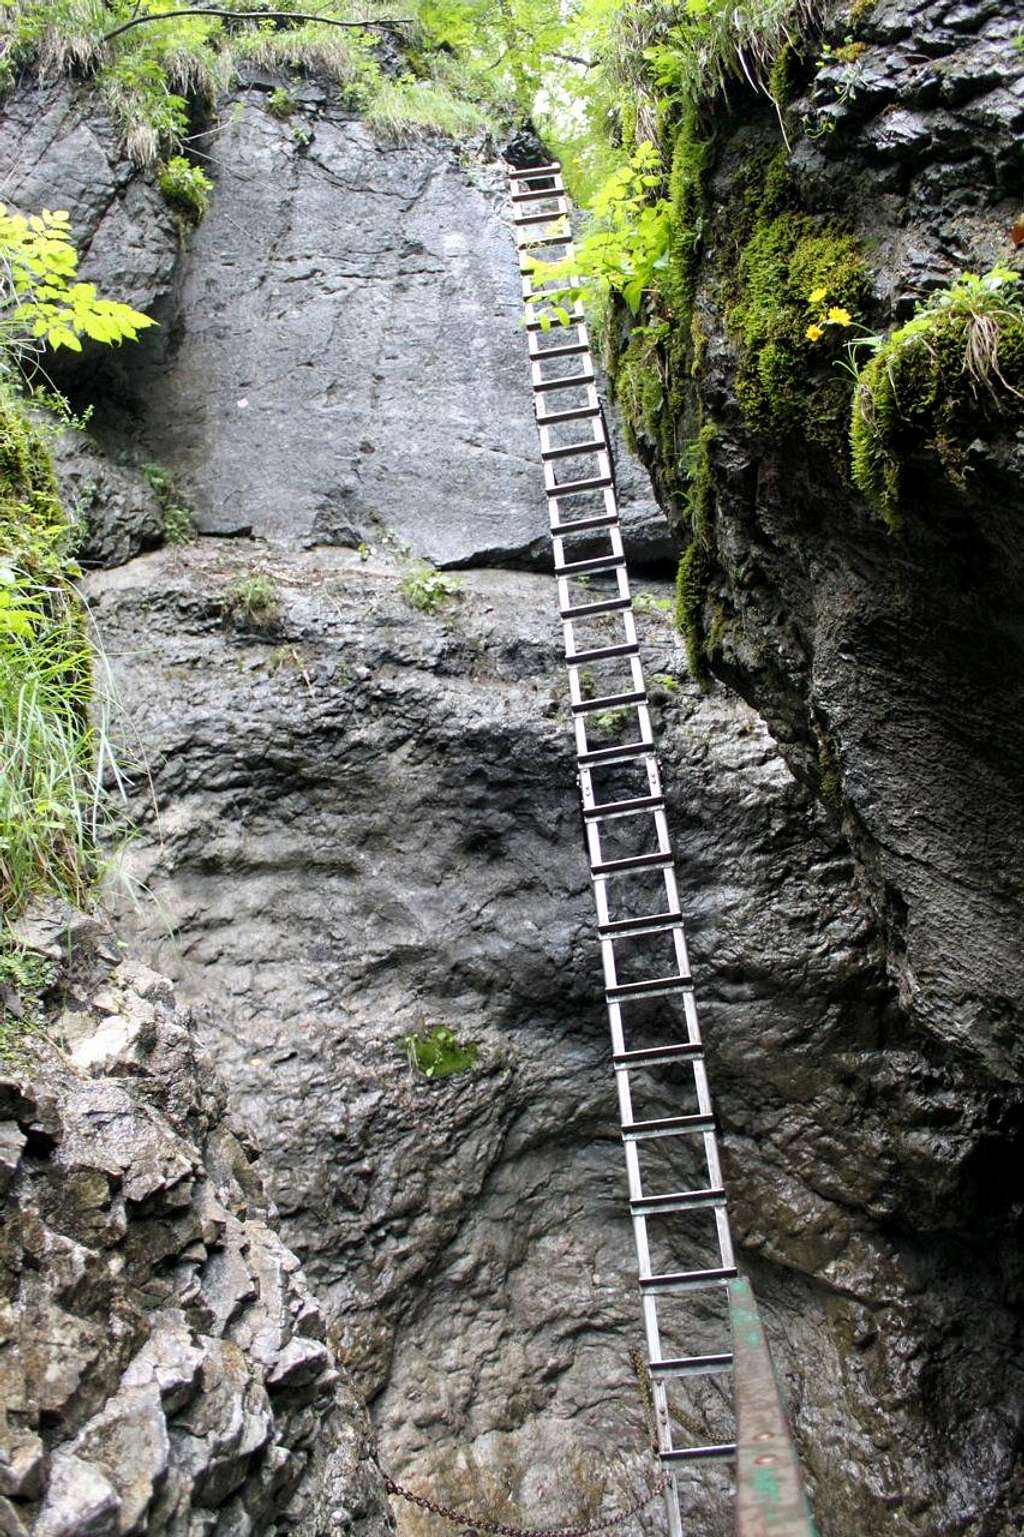 Another long ladder